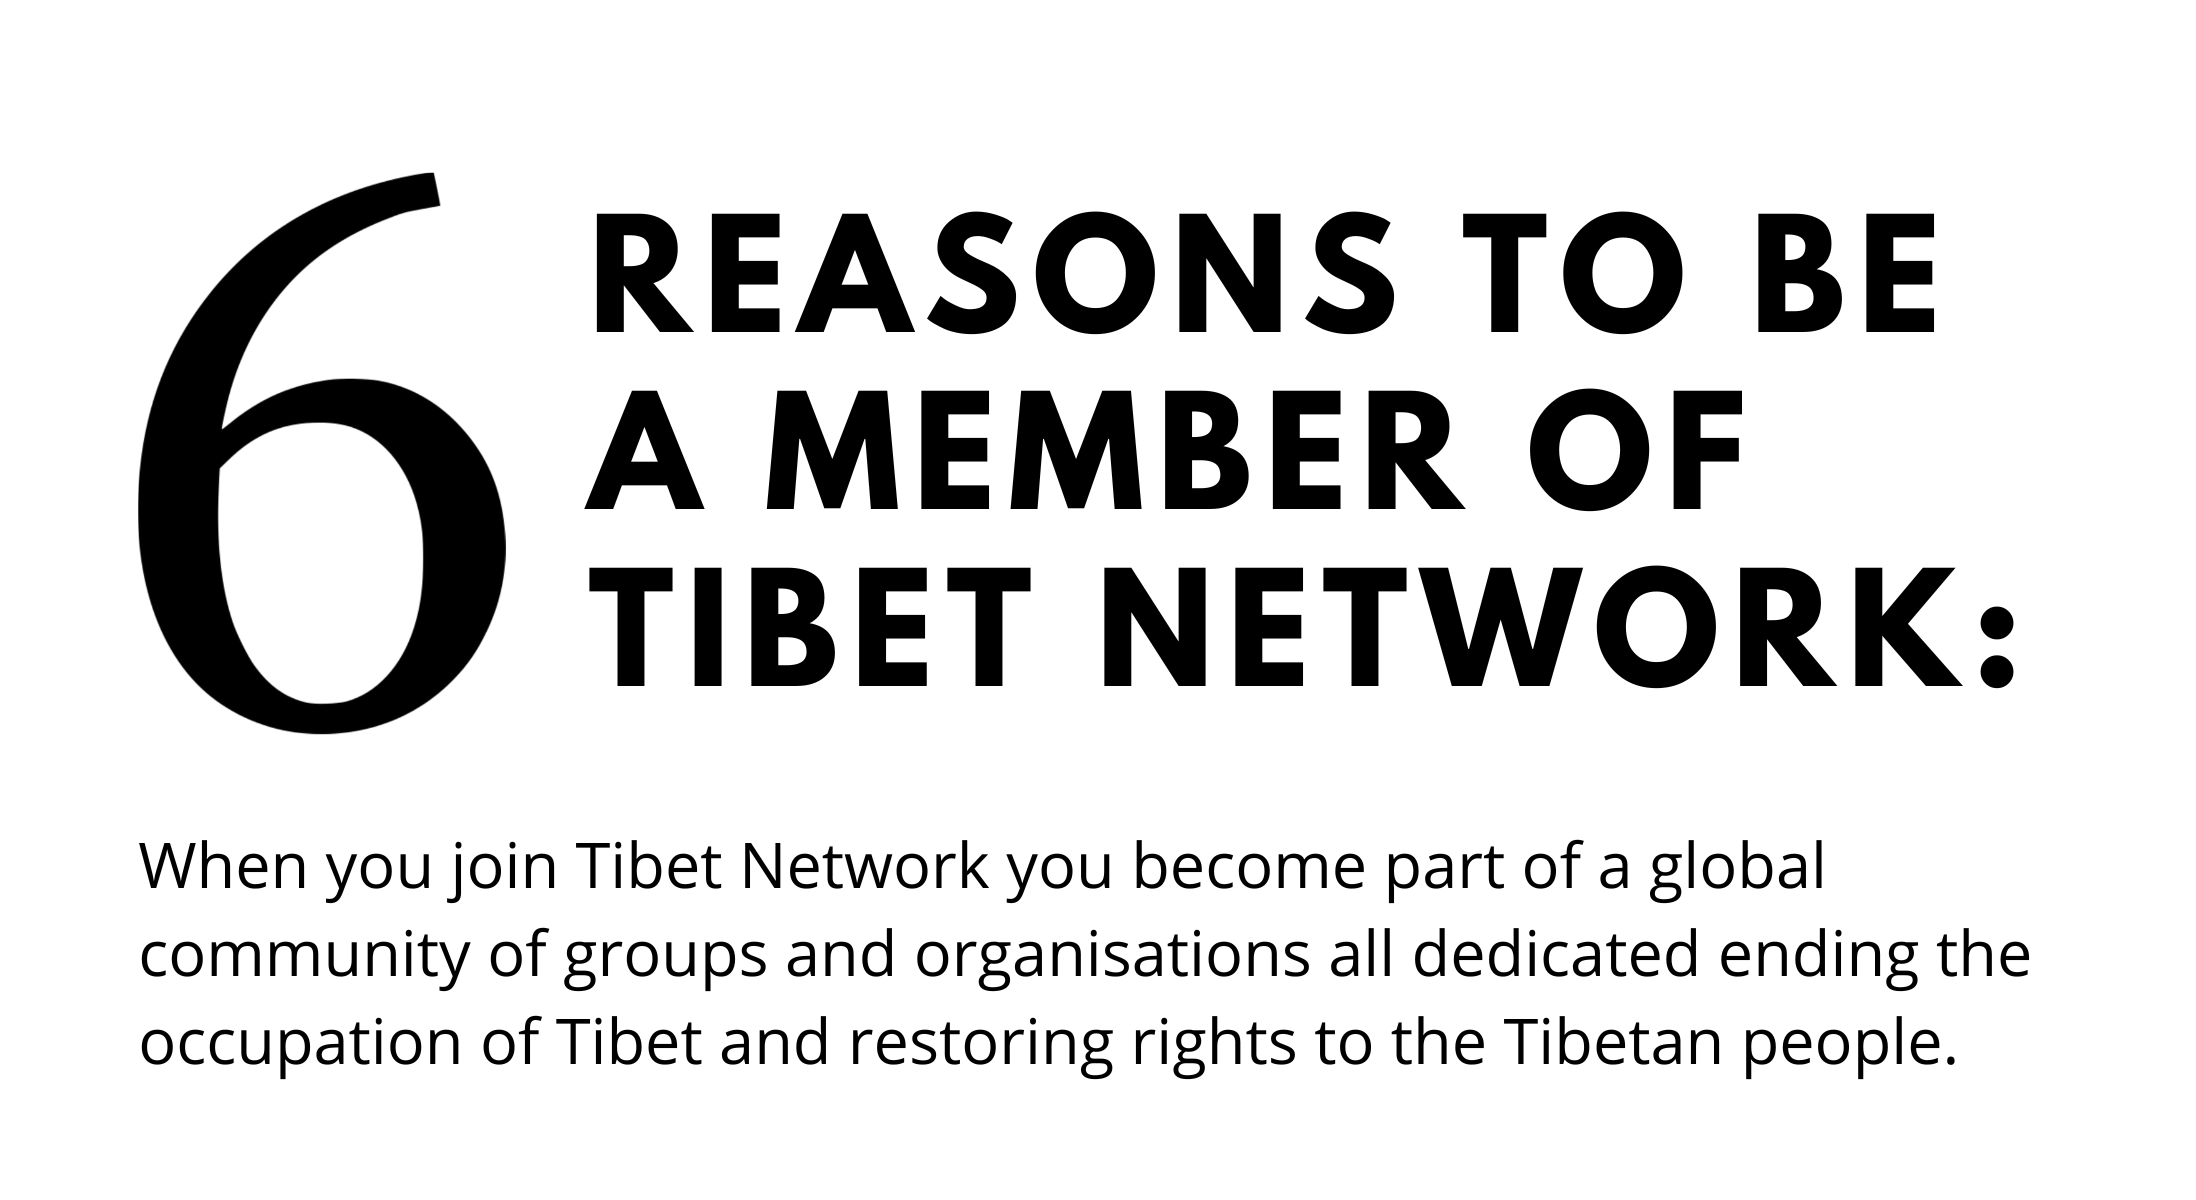 6 Reasons to be a member of Tibet Network